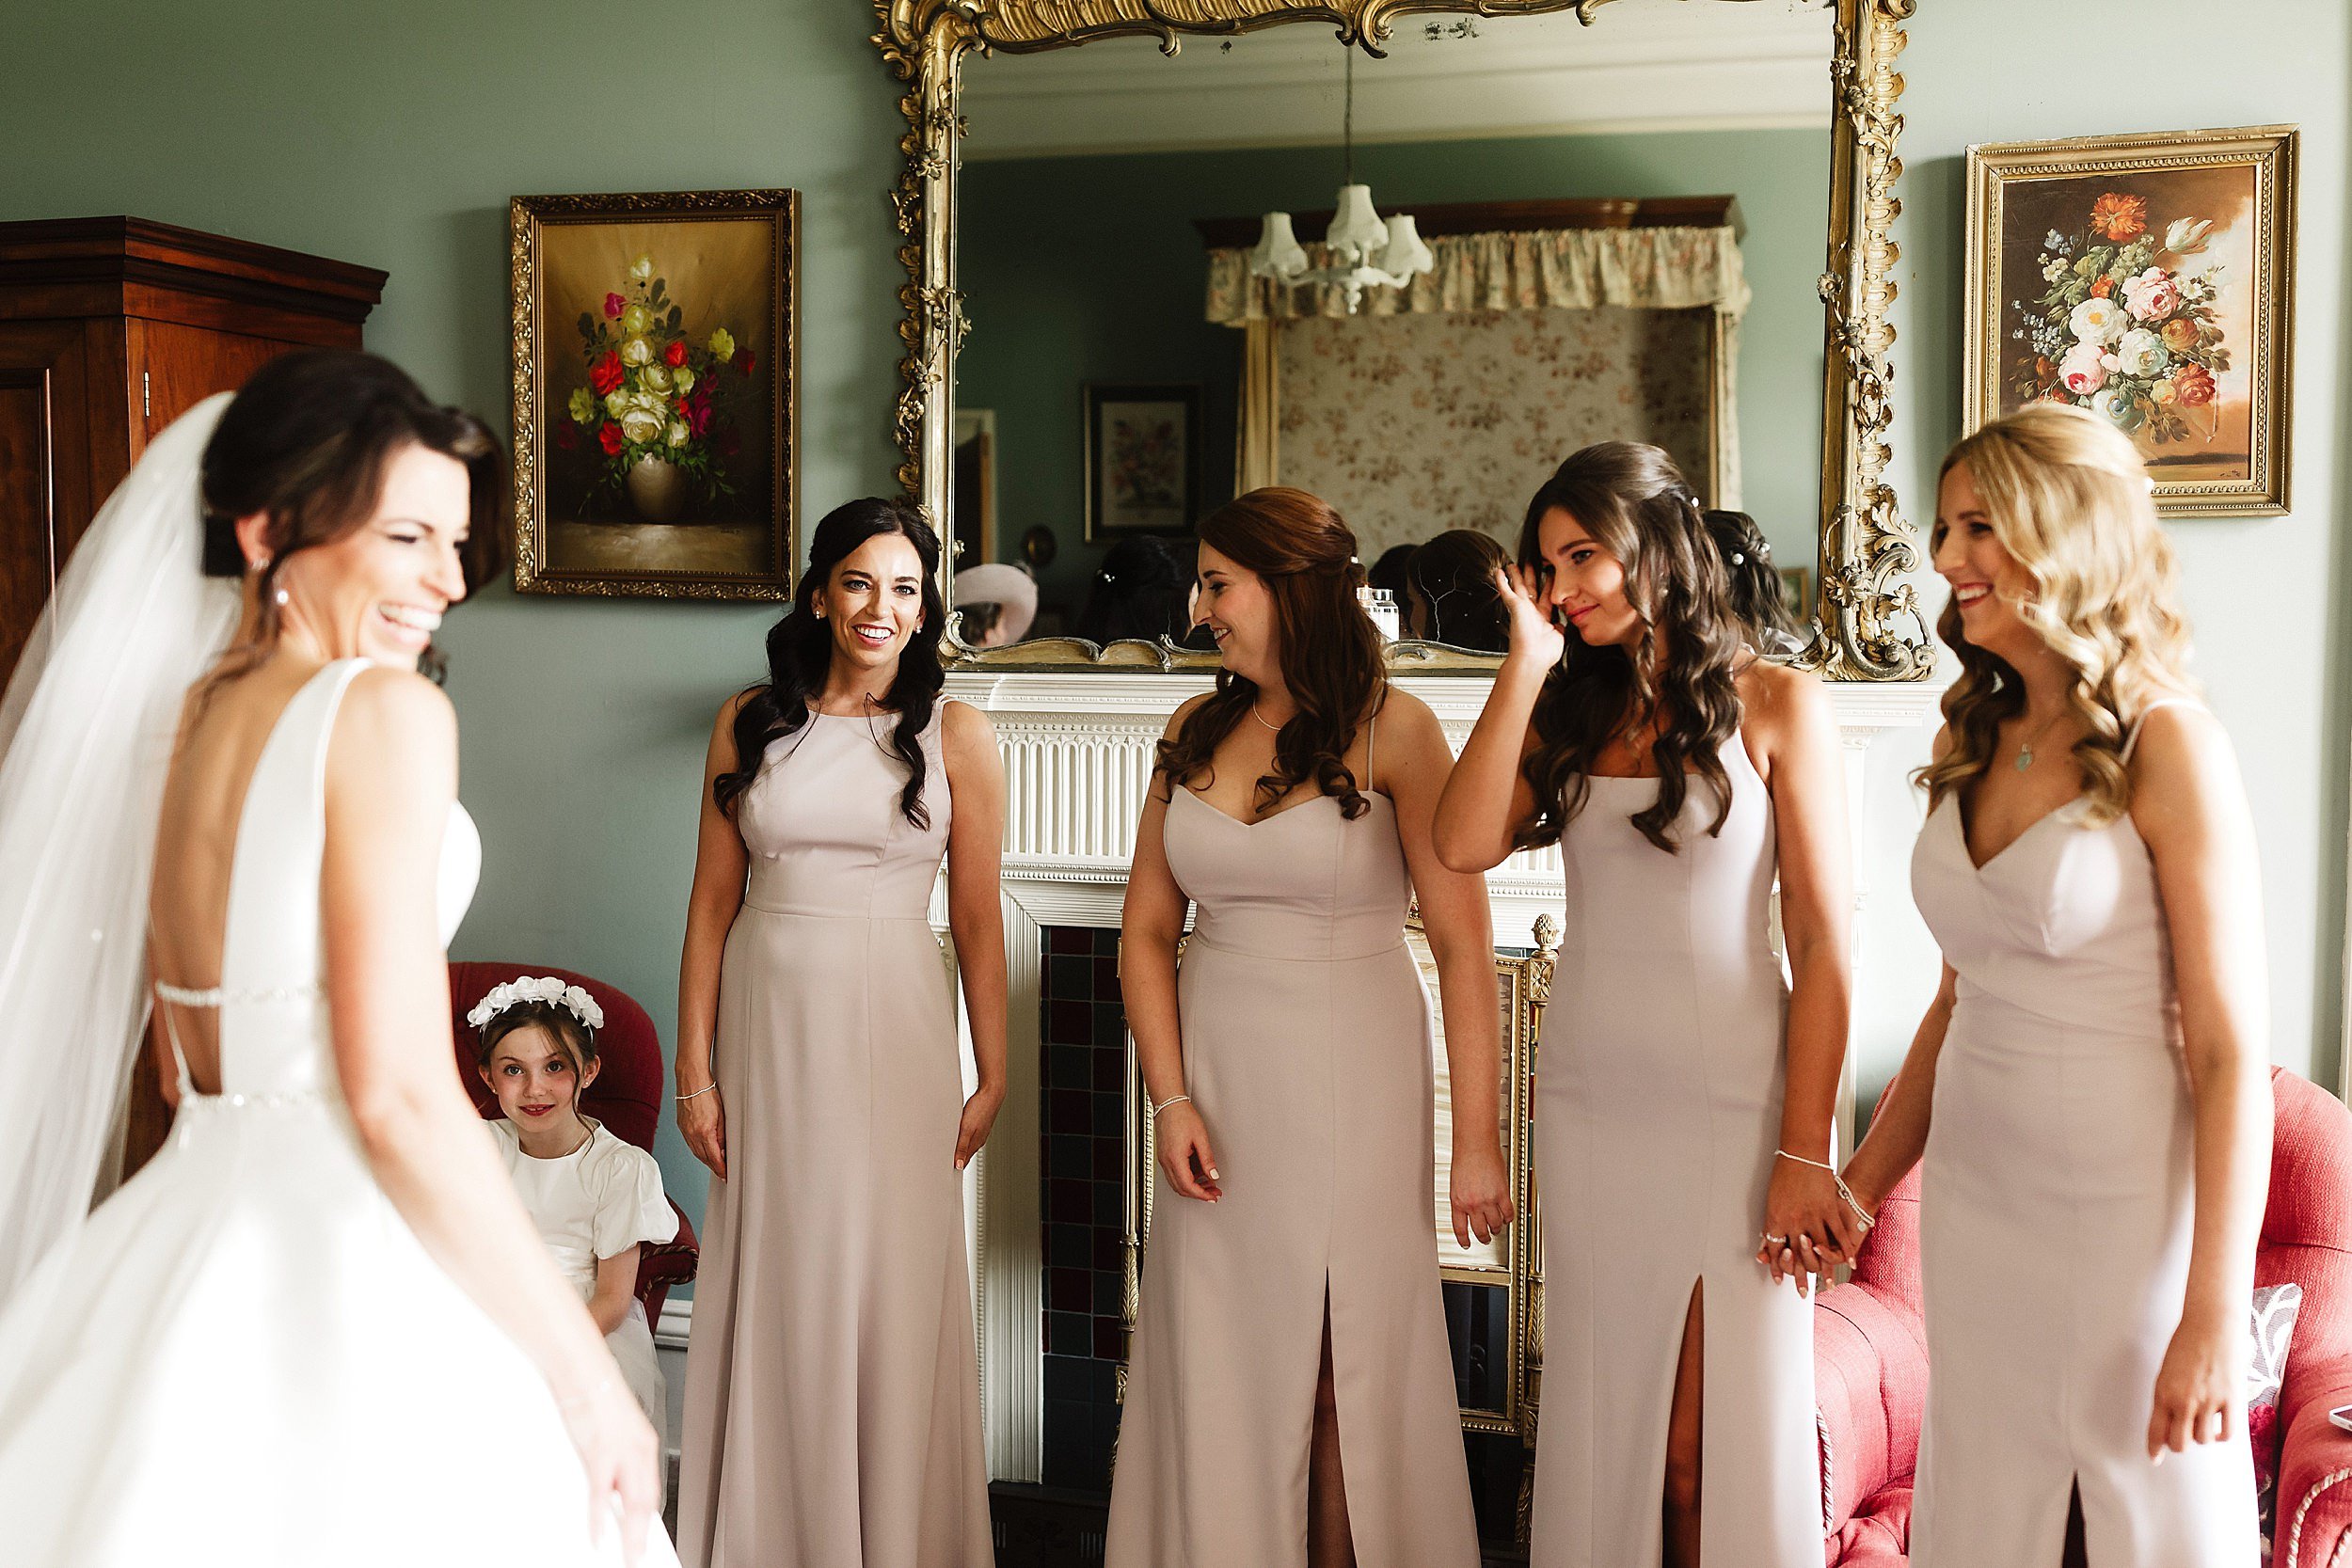 four bridesmaids wearing long blush pink gowns greet the bride in front of an ornate gold mirror above a fireplace in a bedroom in errol park wedding venue in perthshire scotland